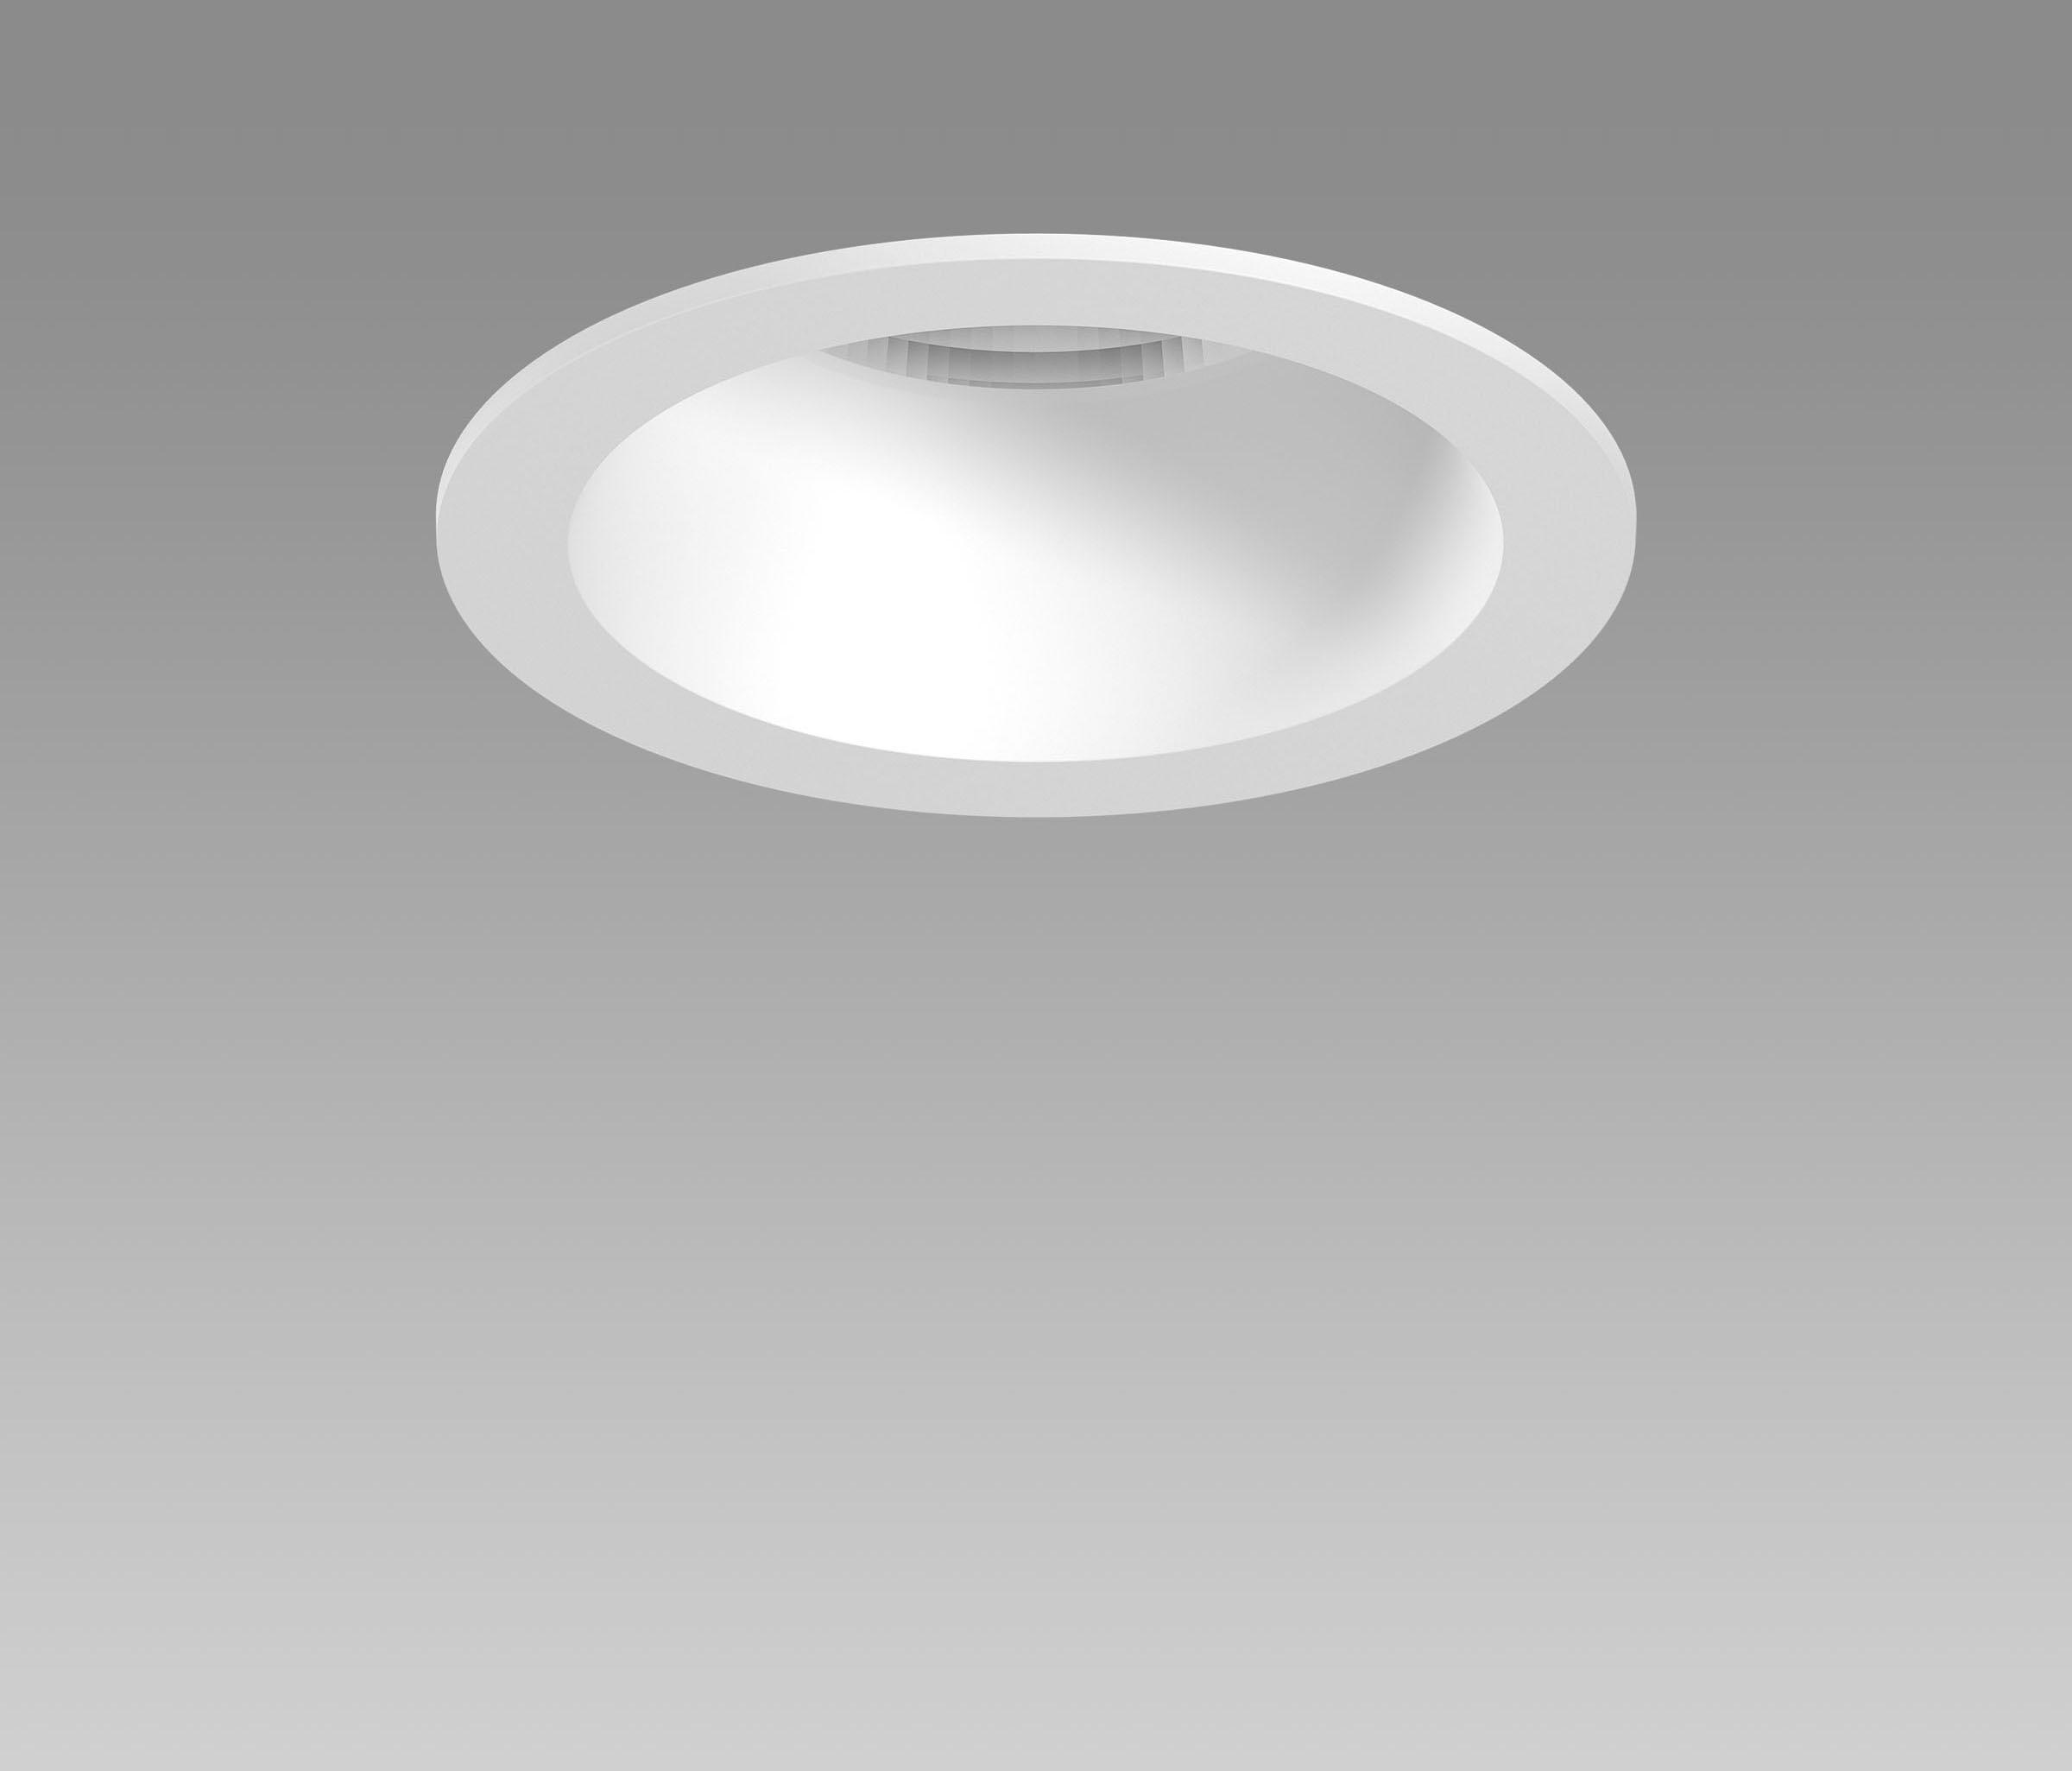 recessed-ceiling-led-lighting-fixtures-mycoffeepot-org